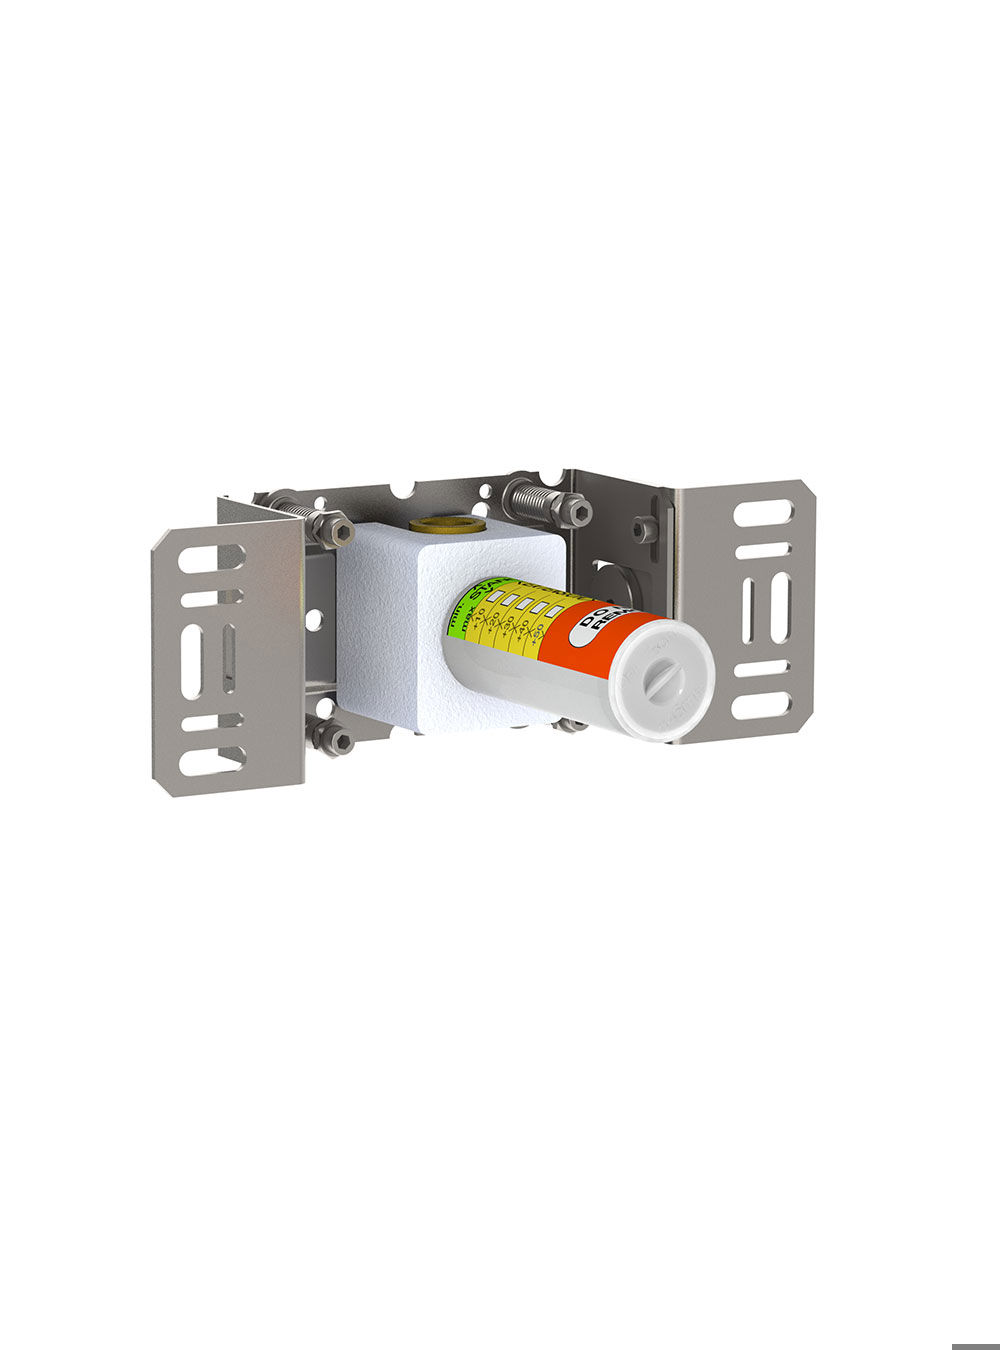 S20V: Build-in stop valve, ½". ½" connection to copper, steel, iron or pex pipe work.